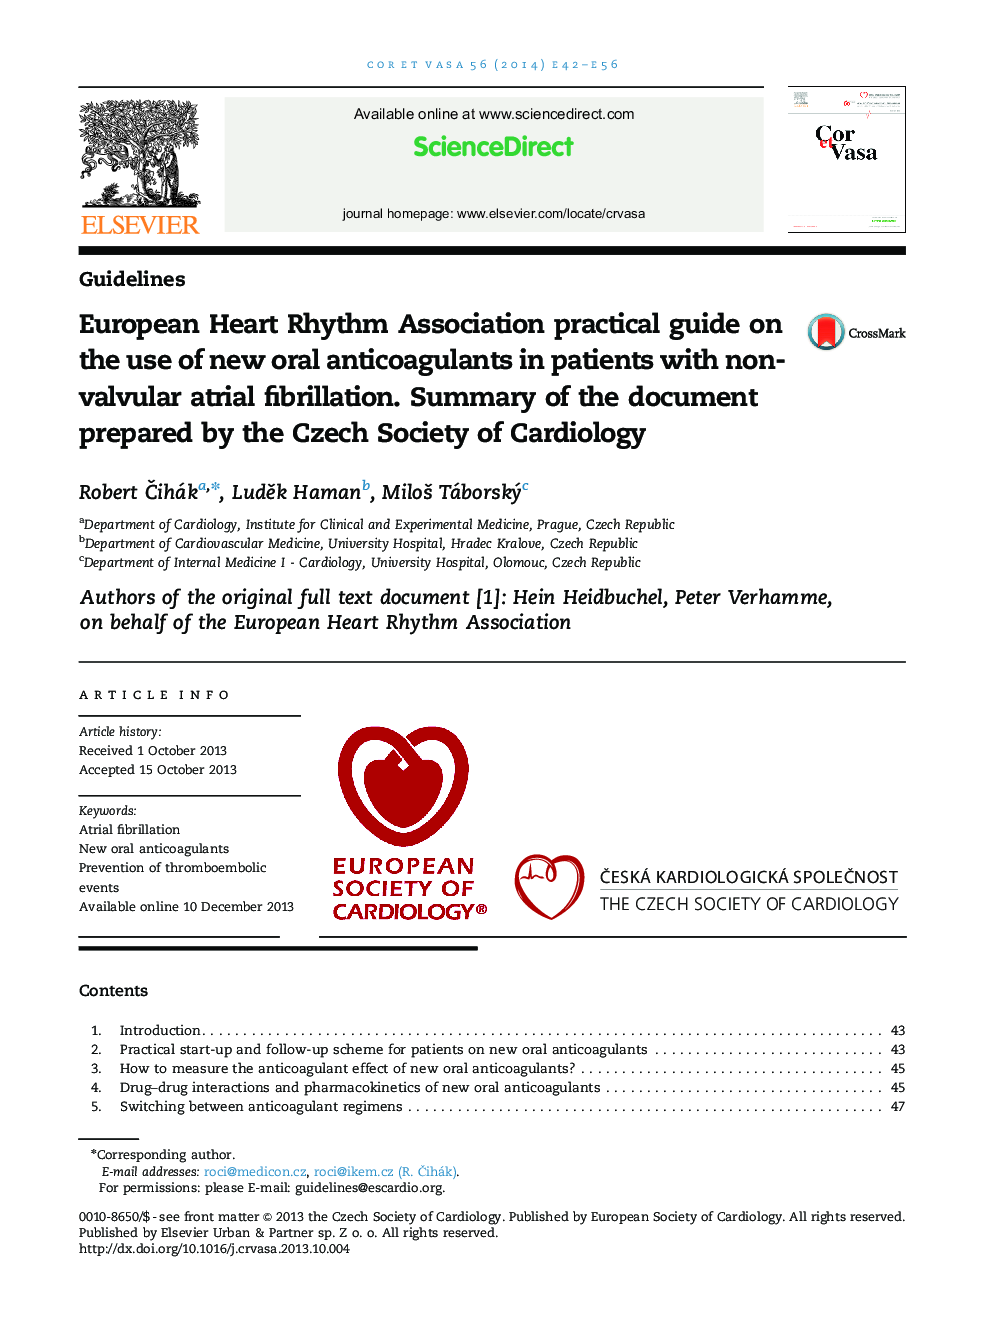 European Heart Rhythm Association practical guide on the use of new oral anticoagulants in patients with non-valvular atrial fibrillation. Summary of the document prepared by the Czech Society of Cardiology1